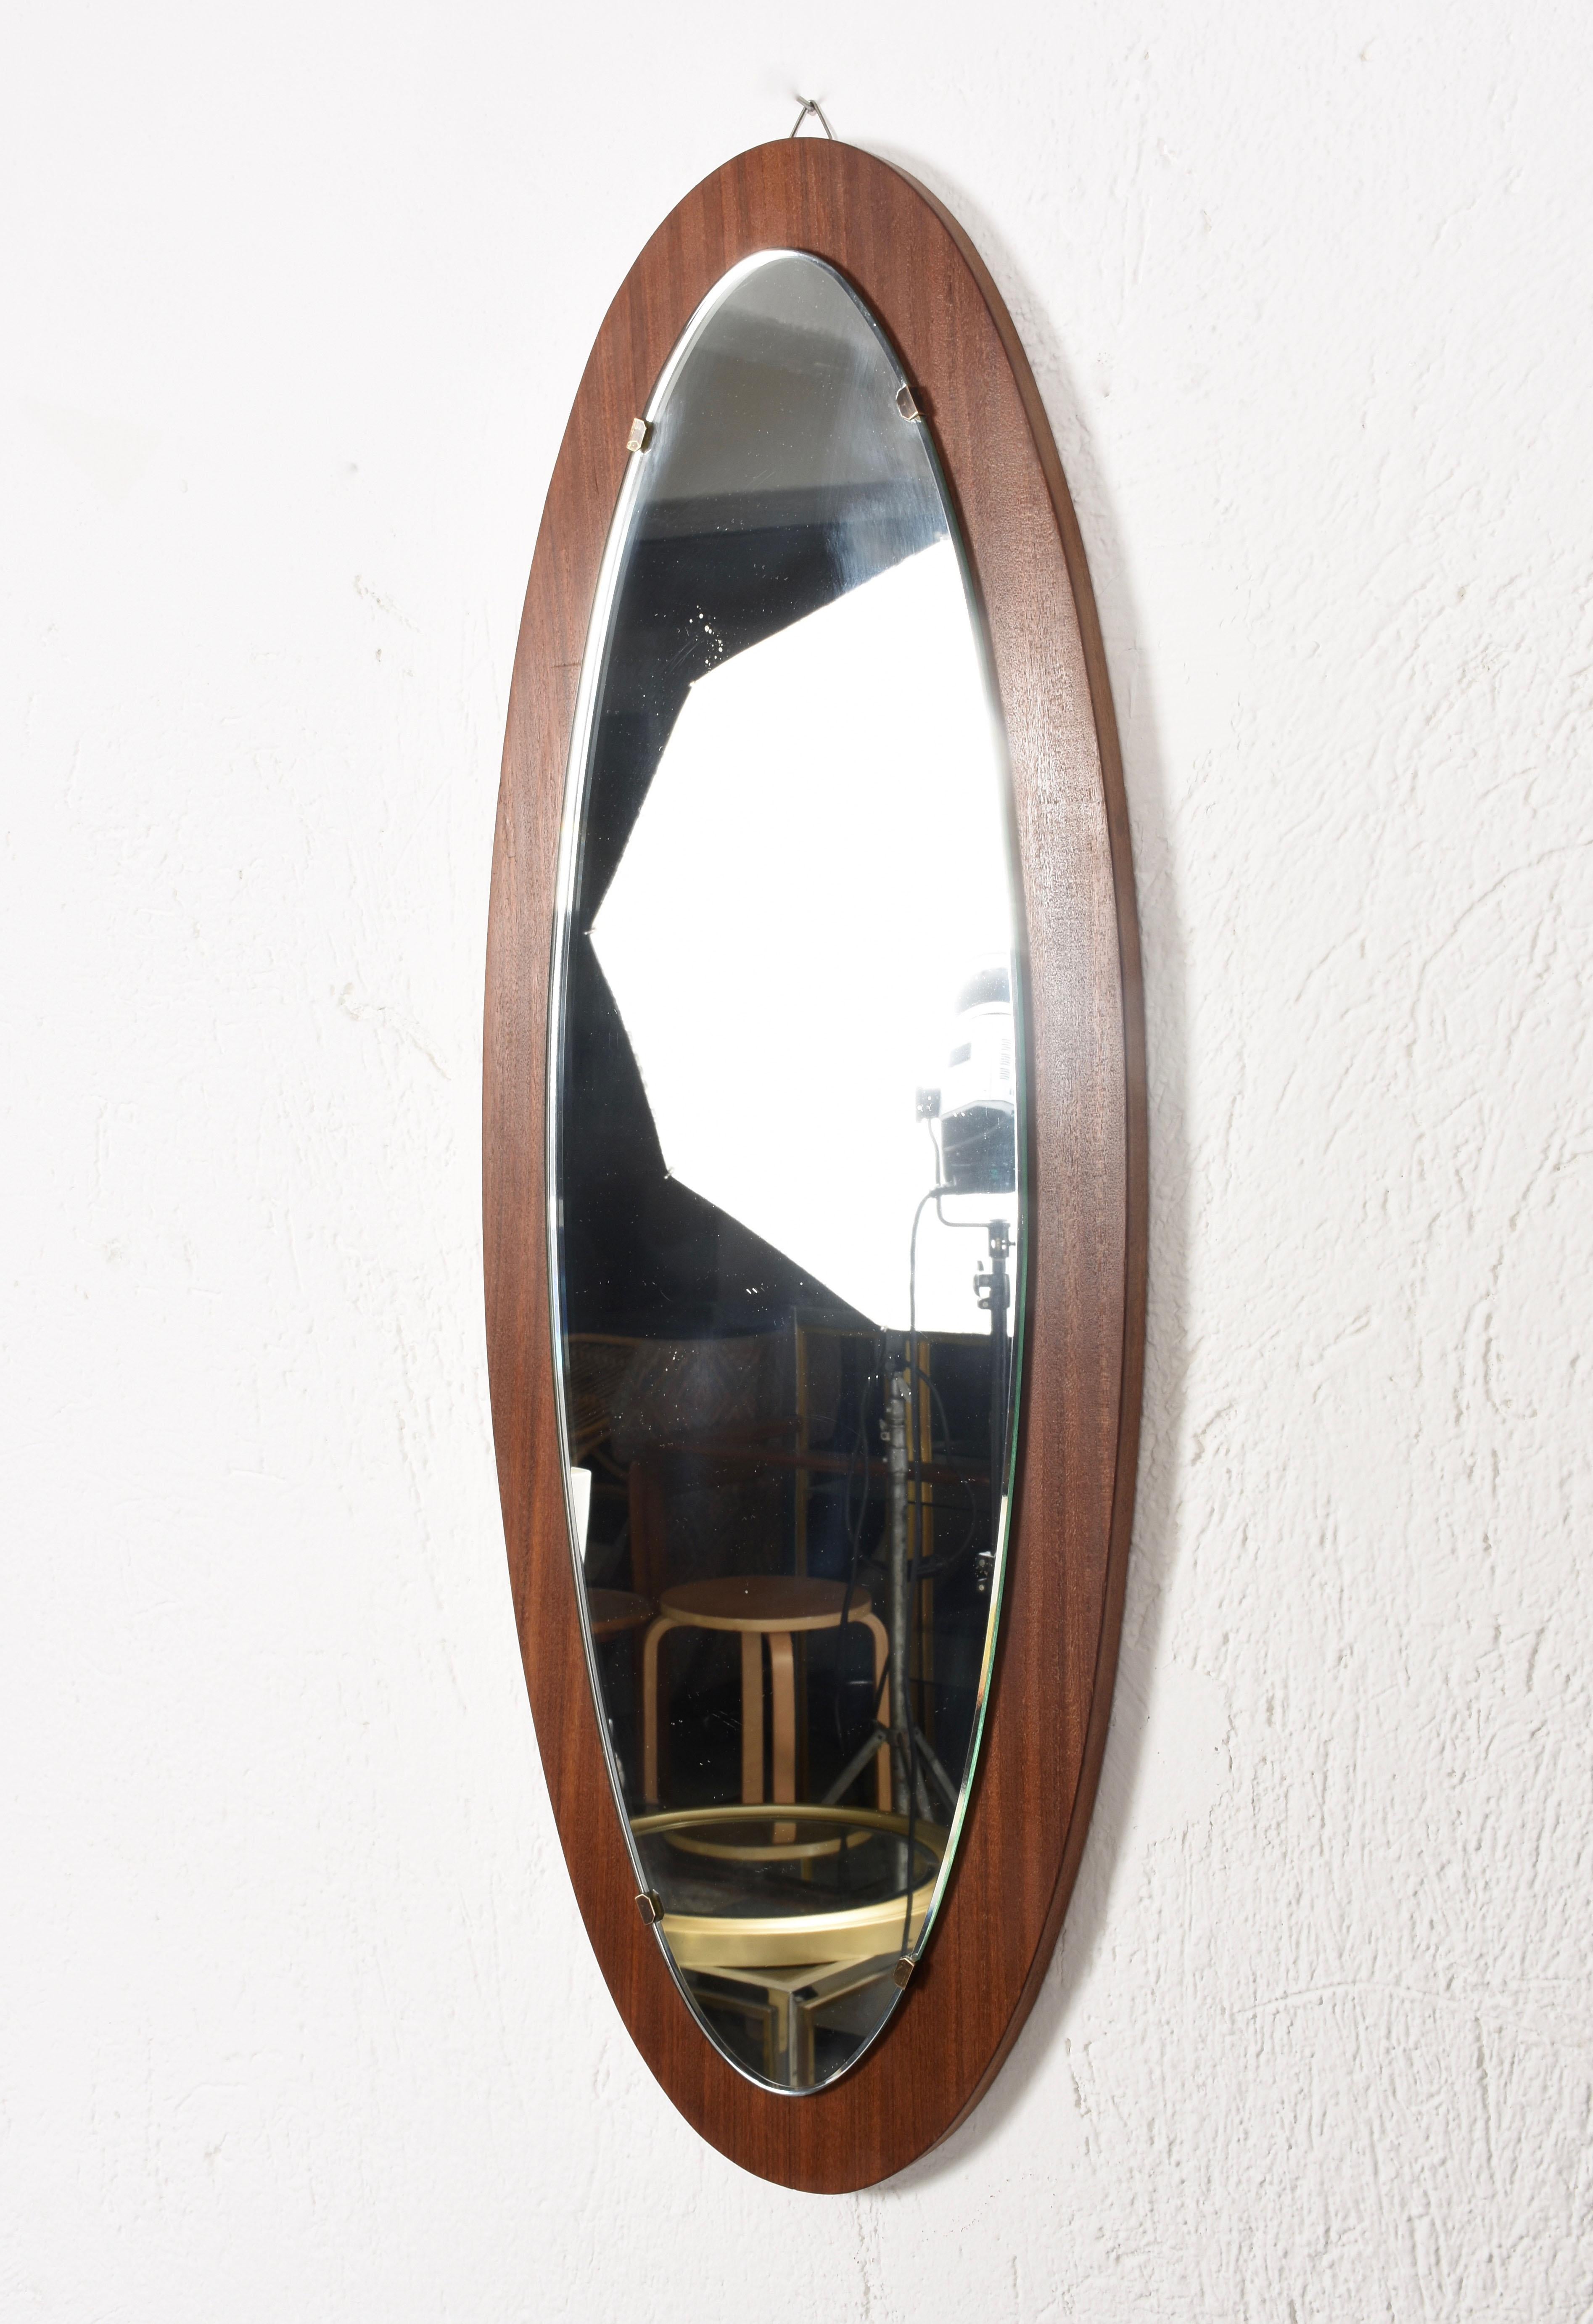 Italian oval wall mirror from the 1960s.
The base is in wood, the supports that hold the mirror in solid brass.
The conditions are good.
Measures: 87 x 34 cm.